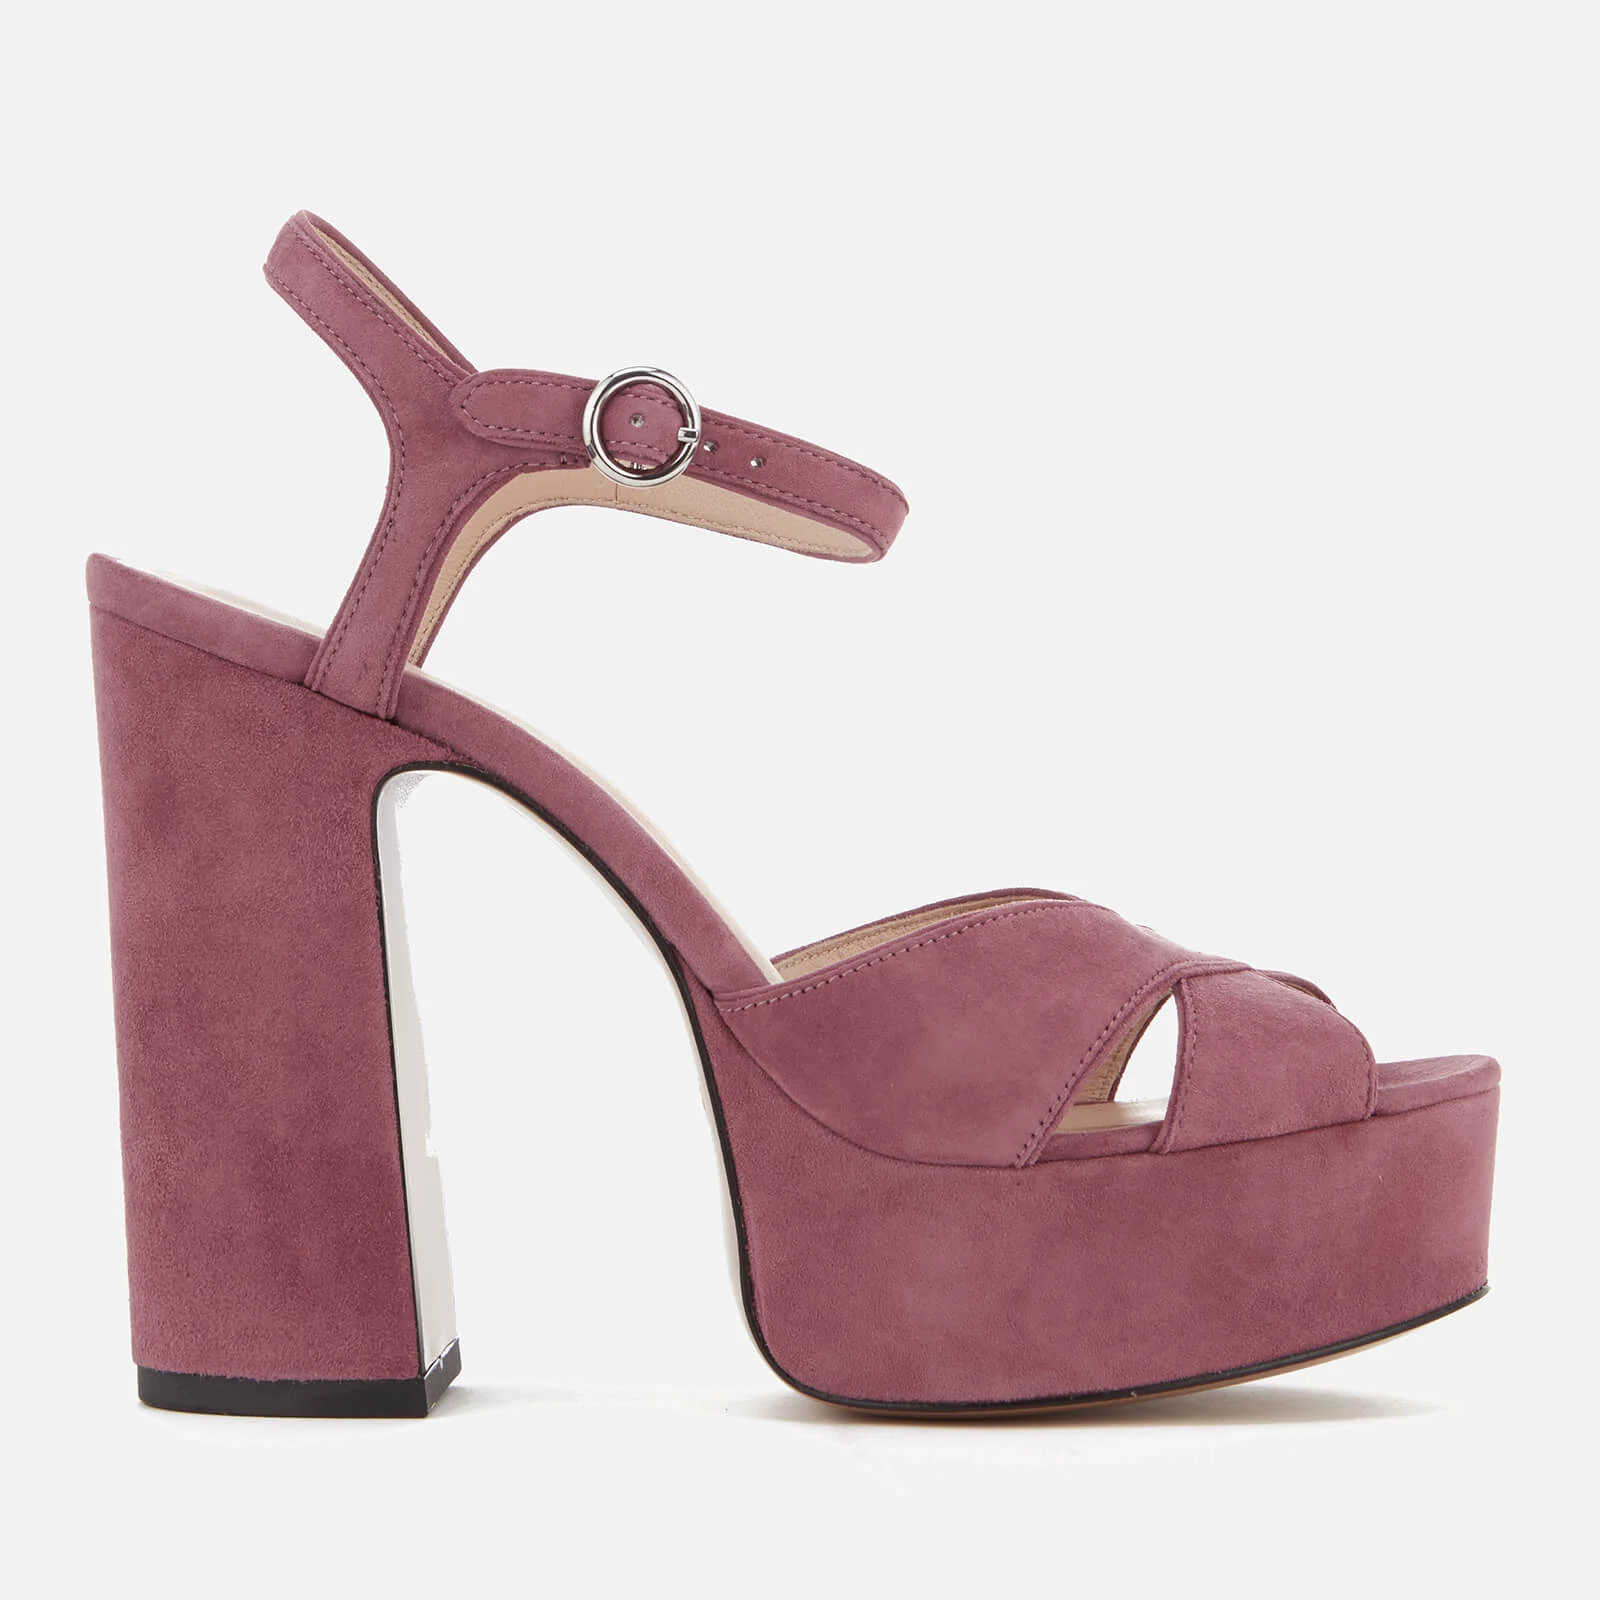 Marc Jacobs Women's Lust Leather Platform Heeled Sandals - Dusty Pink Image 1